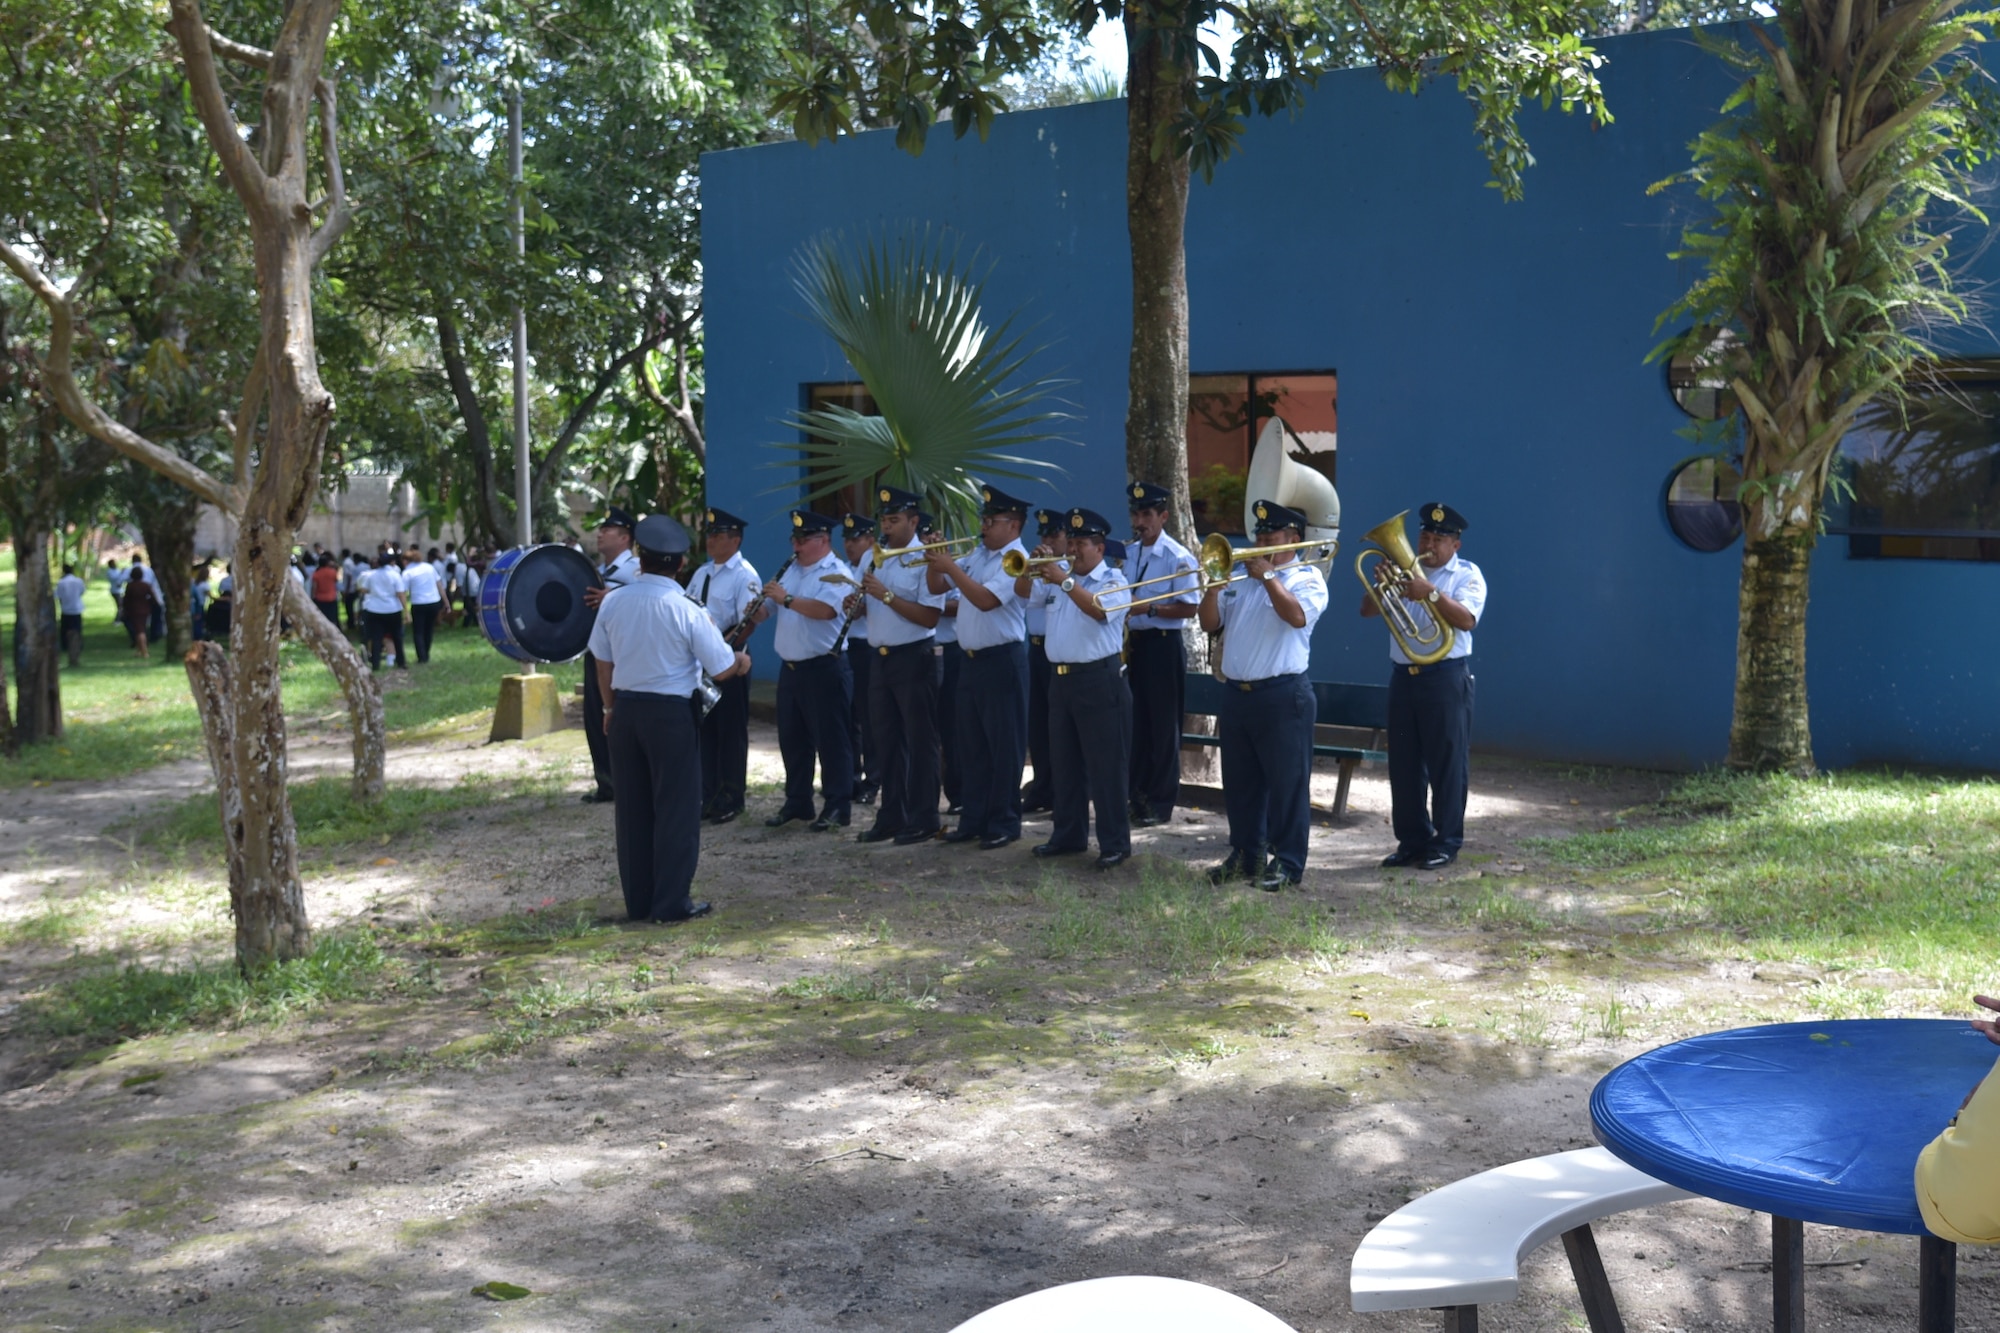 Band members from El Salvadorian Air Force joined efforts with U.S. Air Force Airmen from the 571st Mobility Support Advisory Squadron, out of Travis Air Force Base, Calif., as part of a joint endeavor to give back to the local community of San Martin, located in San Salvador, El Salvador, Sept. 6, 2018. The joint effort was aimed at supporting ISNA, El Salvador’s Institute for Integral Development for Children and Adolescents, which serves approximately 88 children, many of them with mental and physical disabilities. (Courtesy Photo)